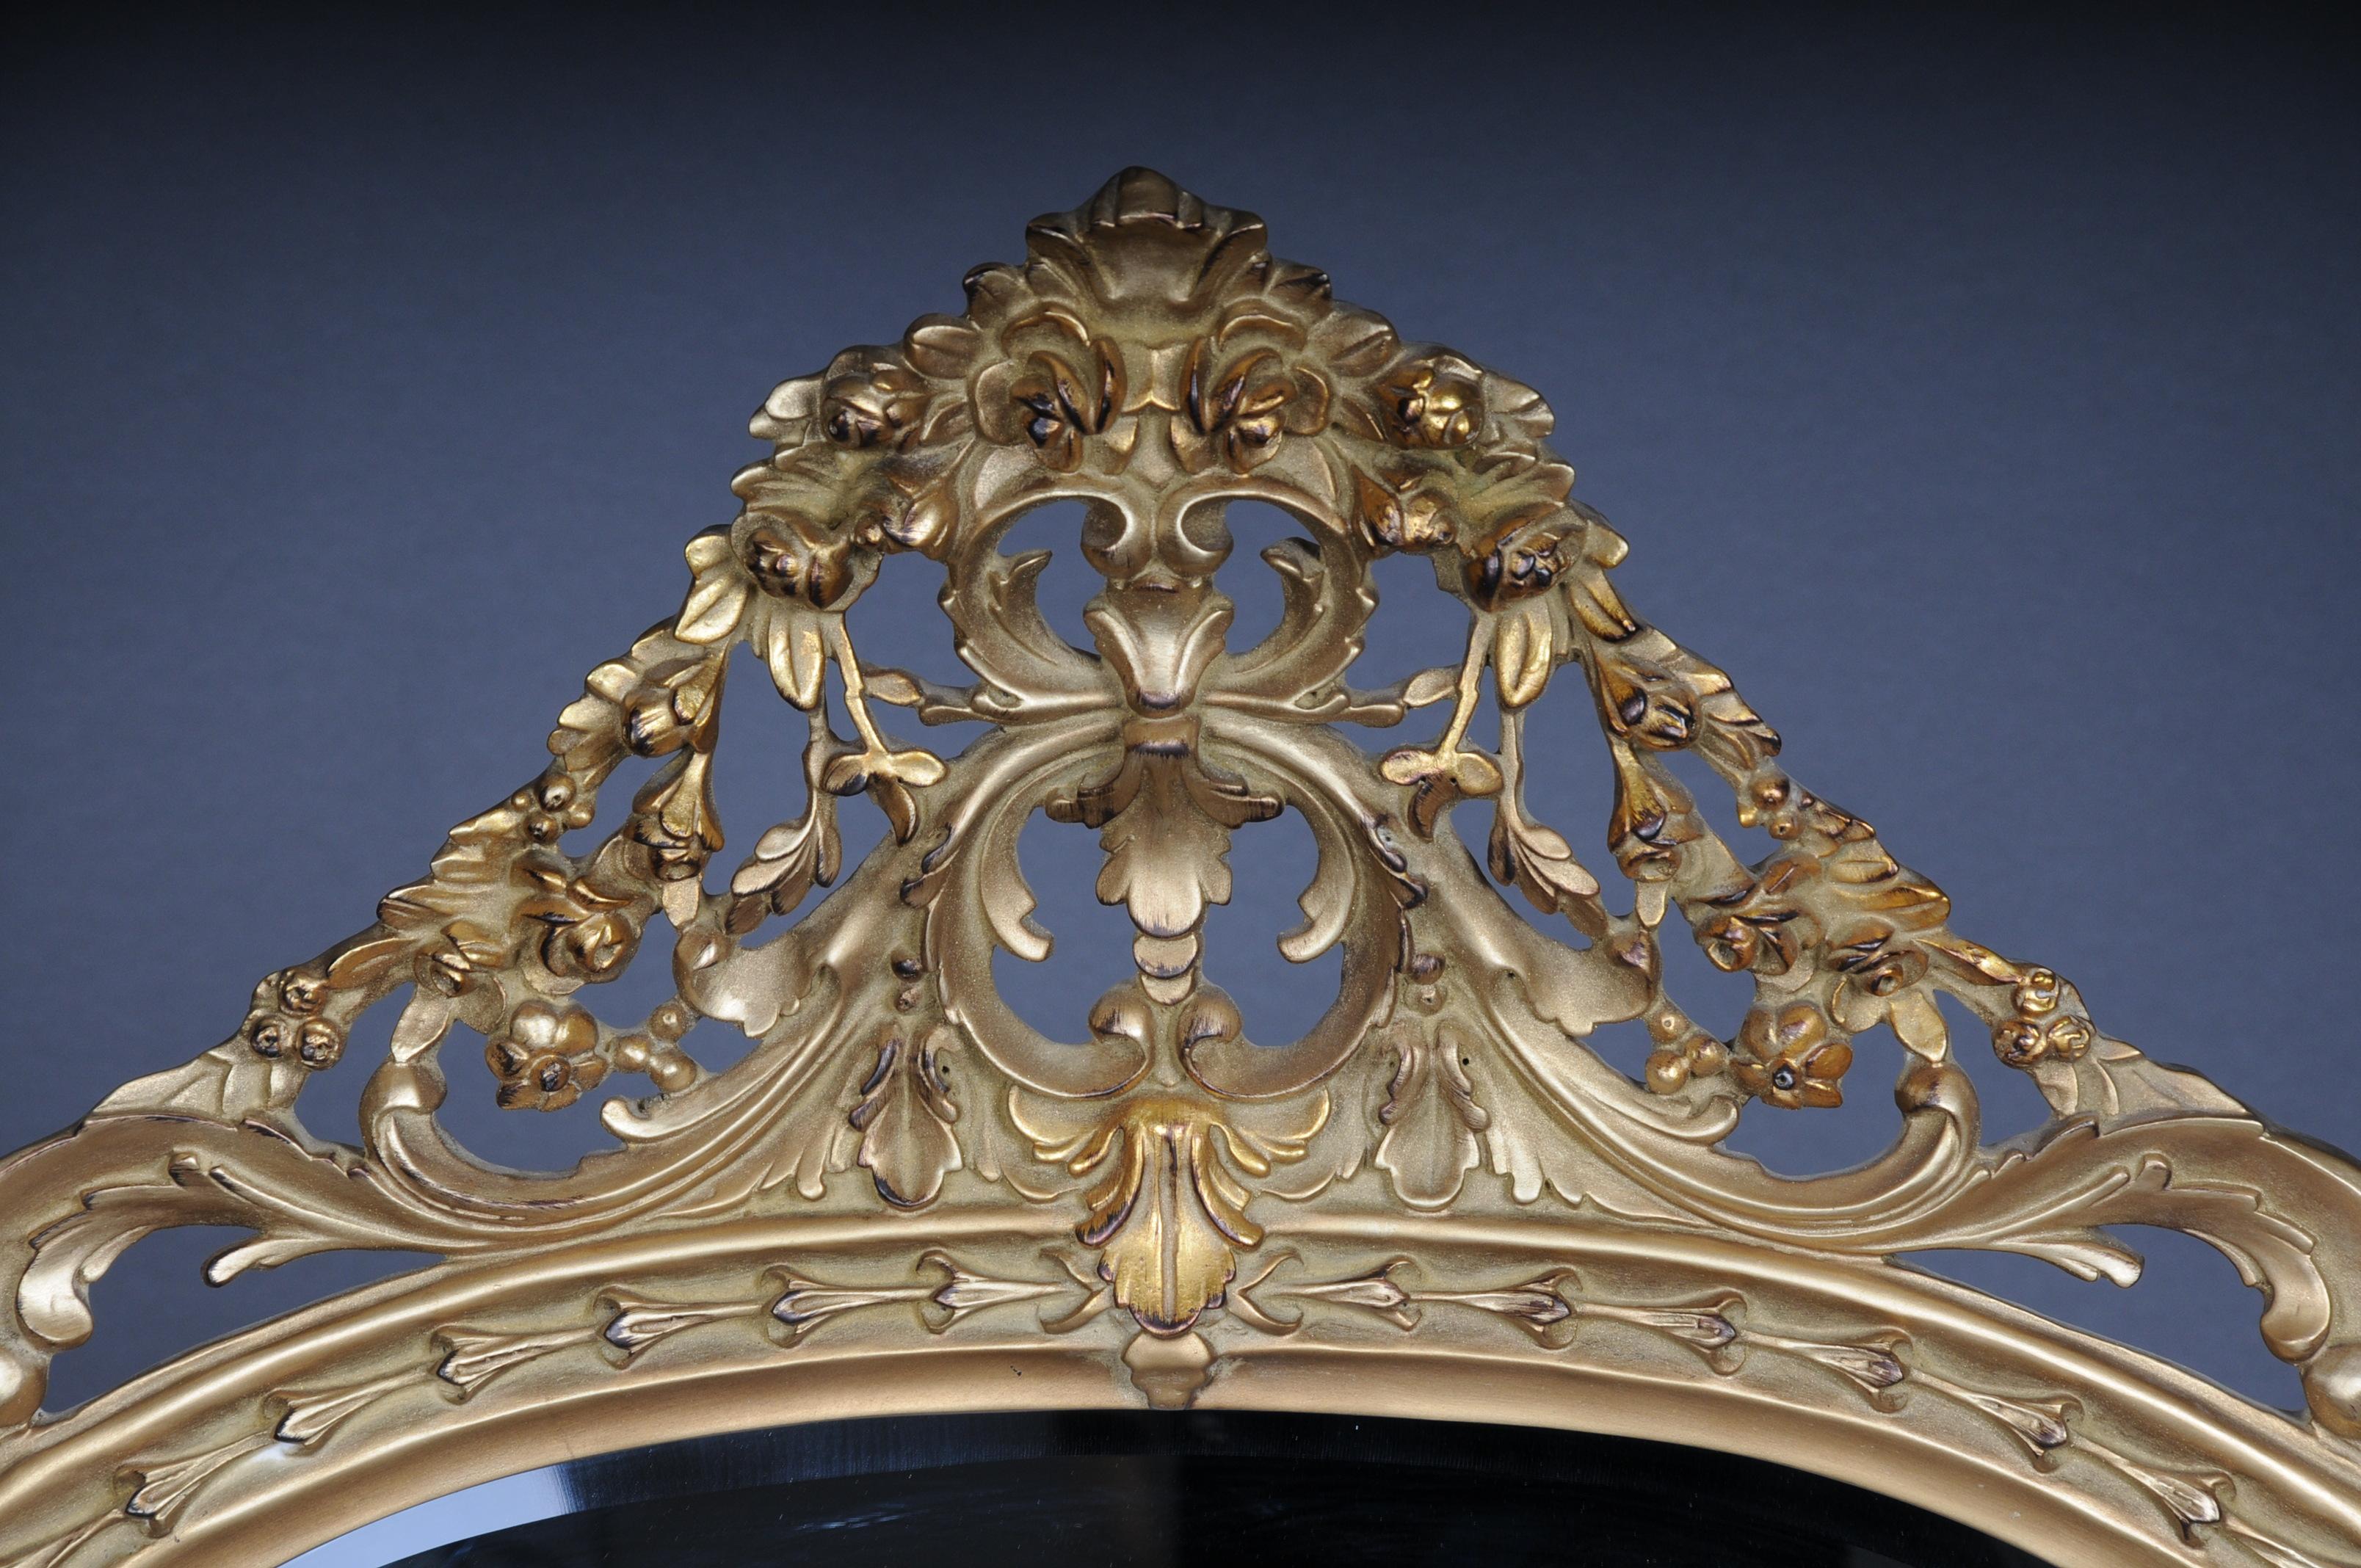 Richly Carved Royal Wall Mirror in Louis XV, Beech Wood In Good Condition For Sale In Berlin, DE